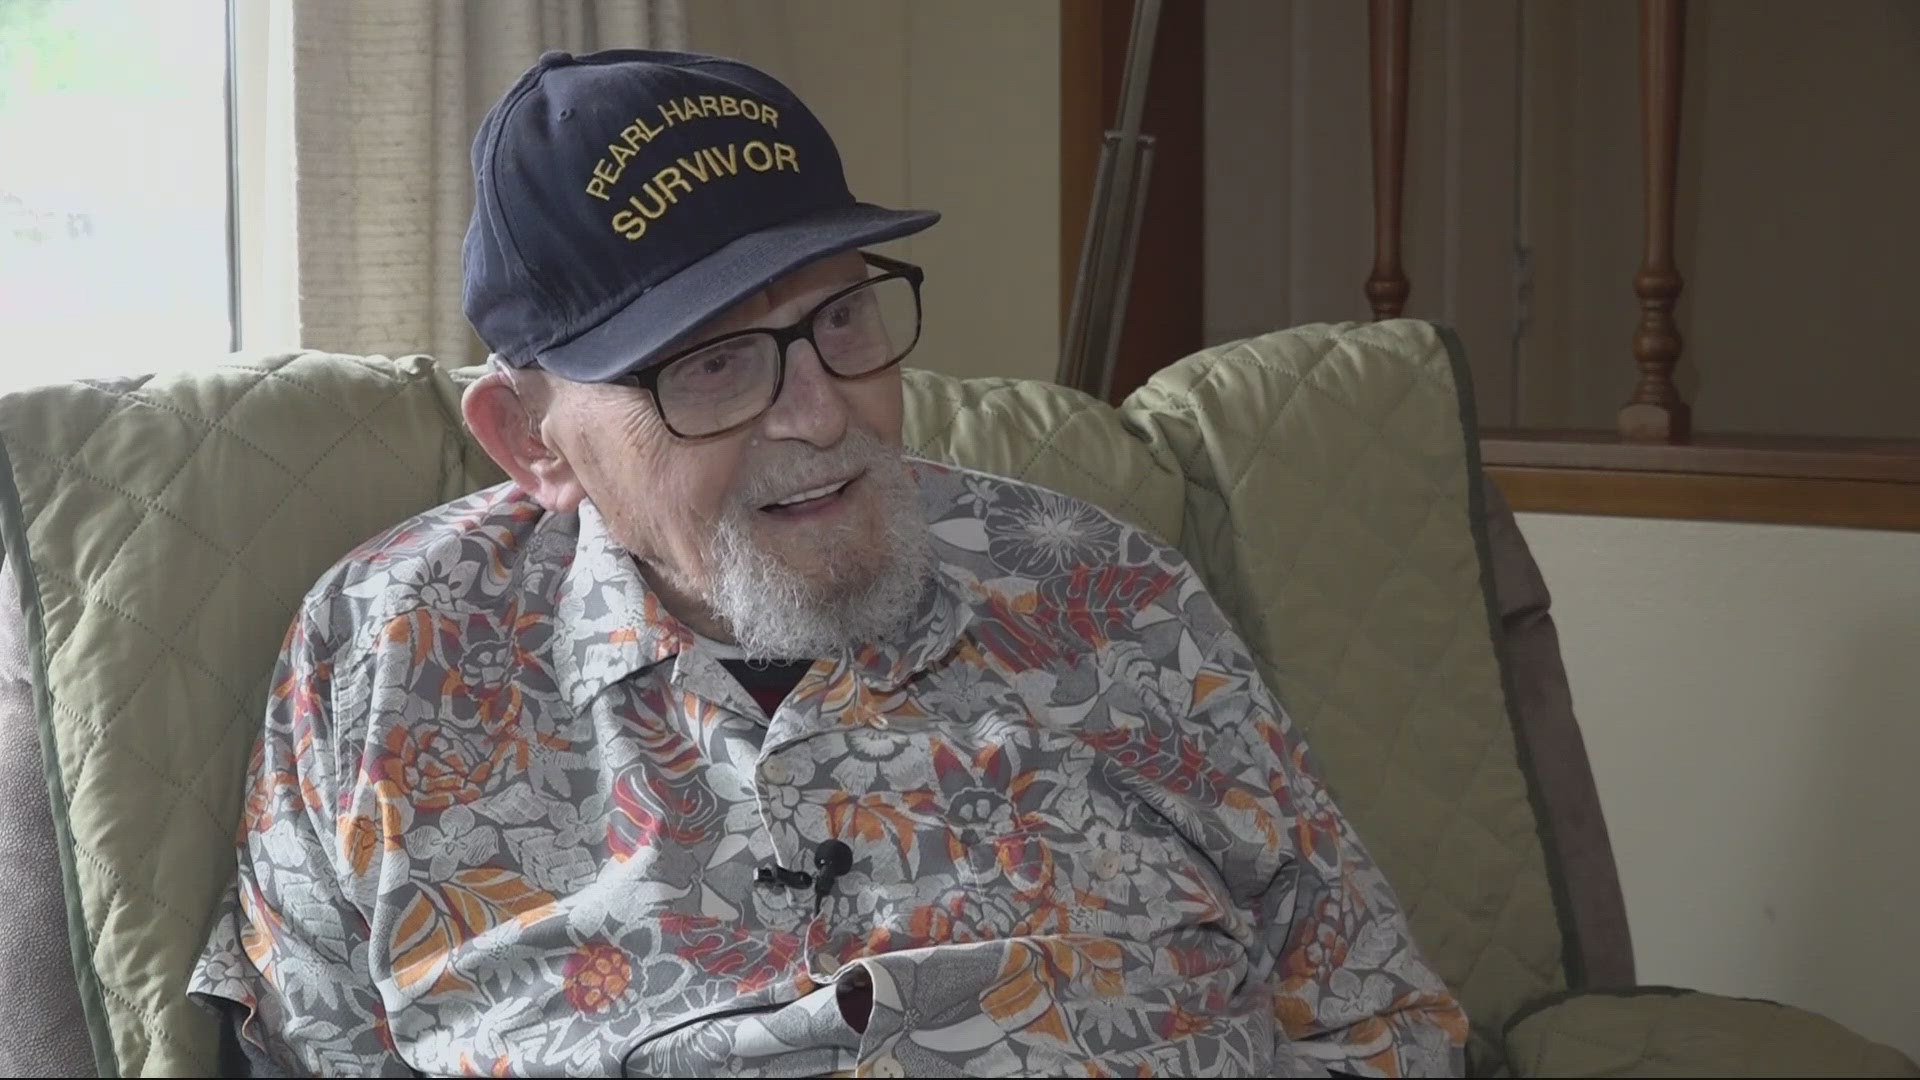 Ira "Ike" Schab turned 104 on Thursday. The Pearl Harbor veteran, who lives in Beaverton, shares a Fourth of July birthday with his daughter.